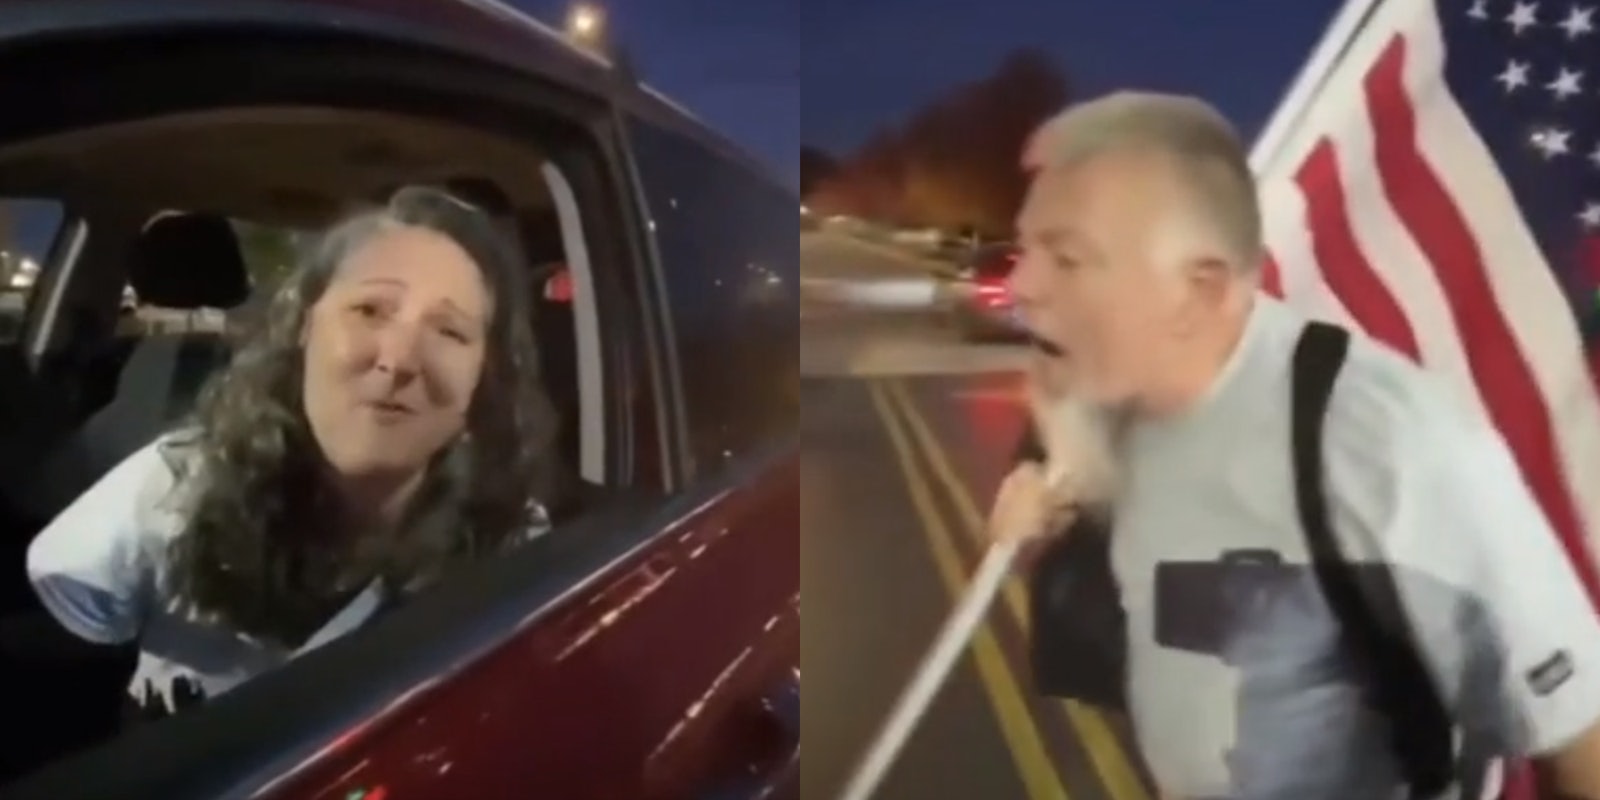 armed trump supporter yells at woman